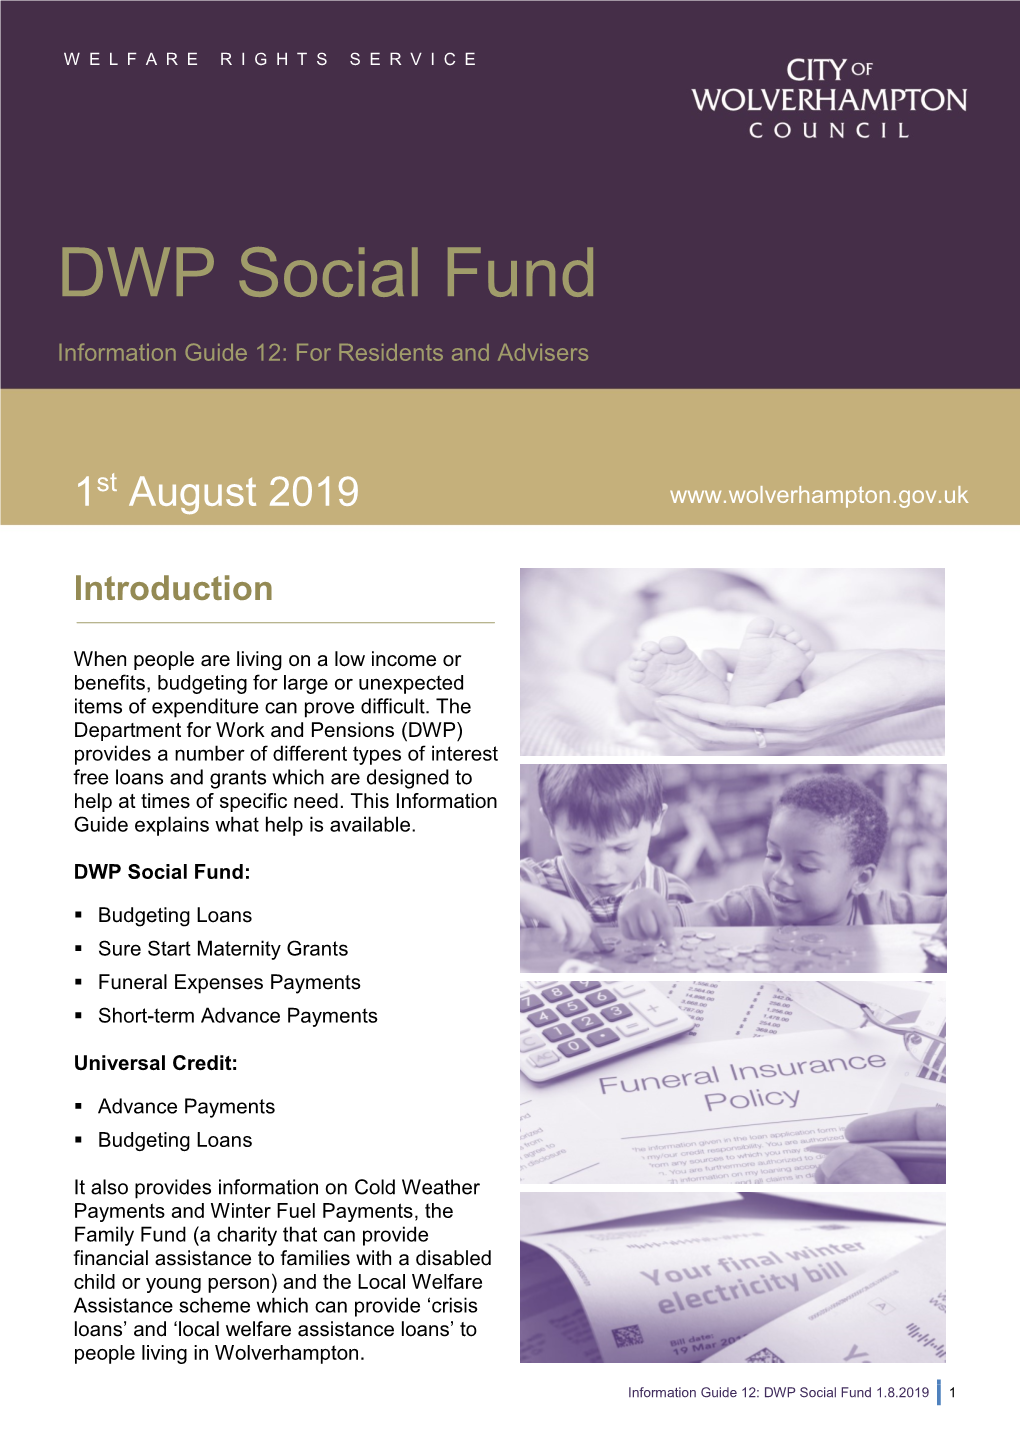 Information Guide 12: DWP Social Fund 1.8.2019 1